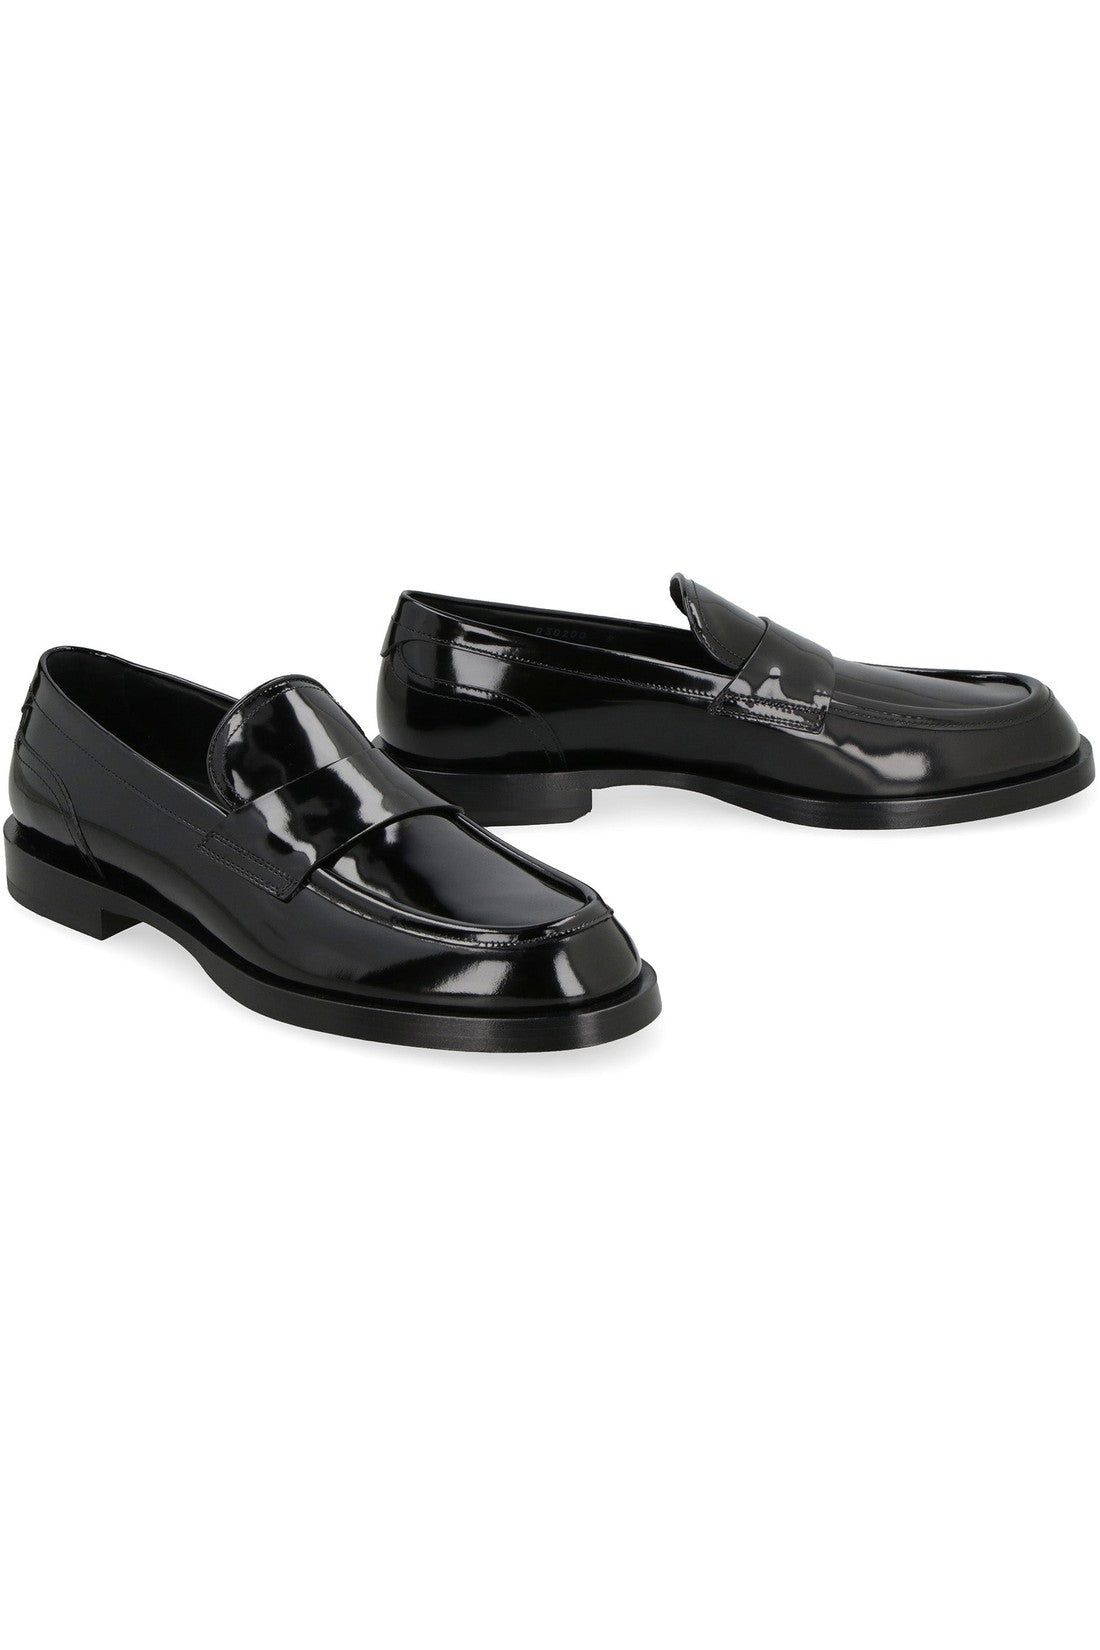 Dolce & Gabbana-OUTLET-SALE-Leather loafers-ARCHIVIST